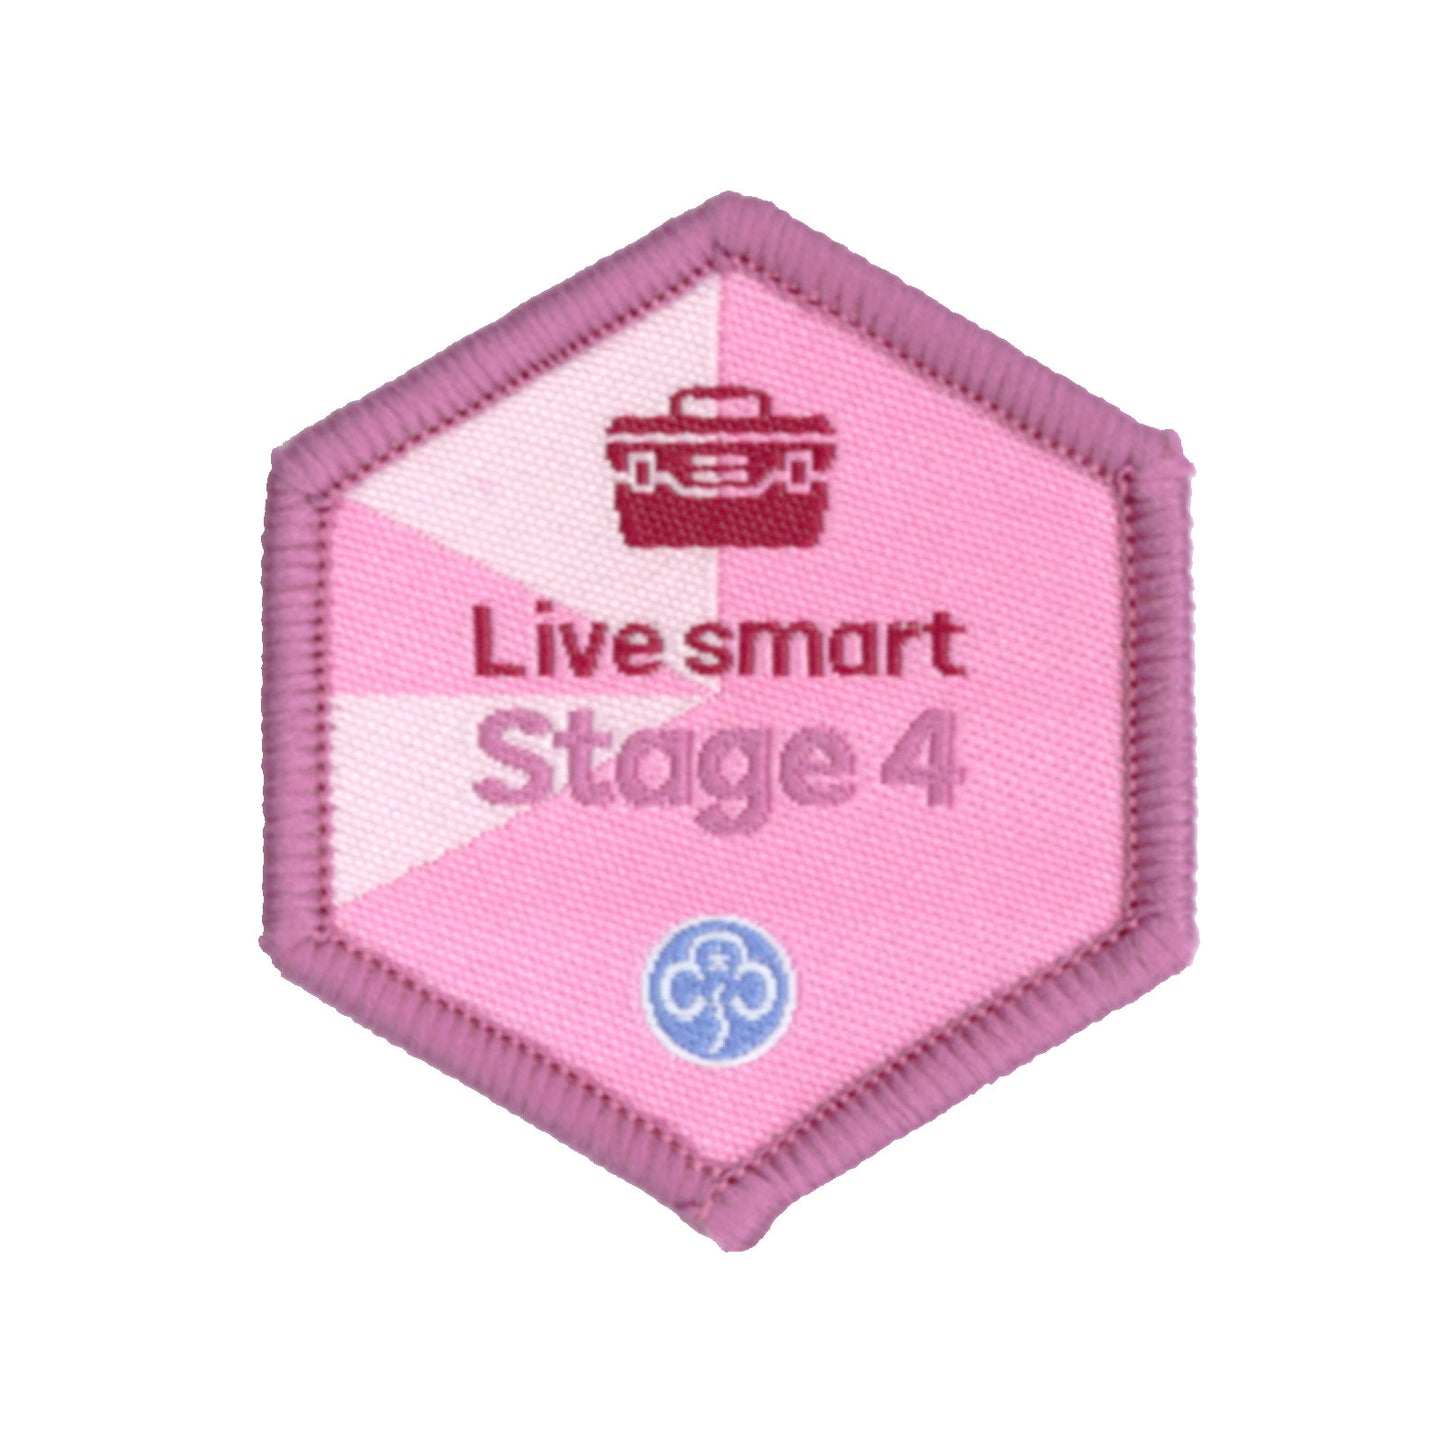 Skills Builder - Skills For My Future - Live Smart Stage 4 Woven Badge